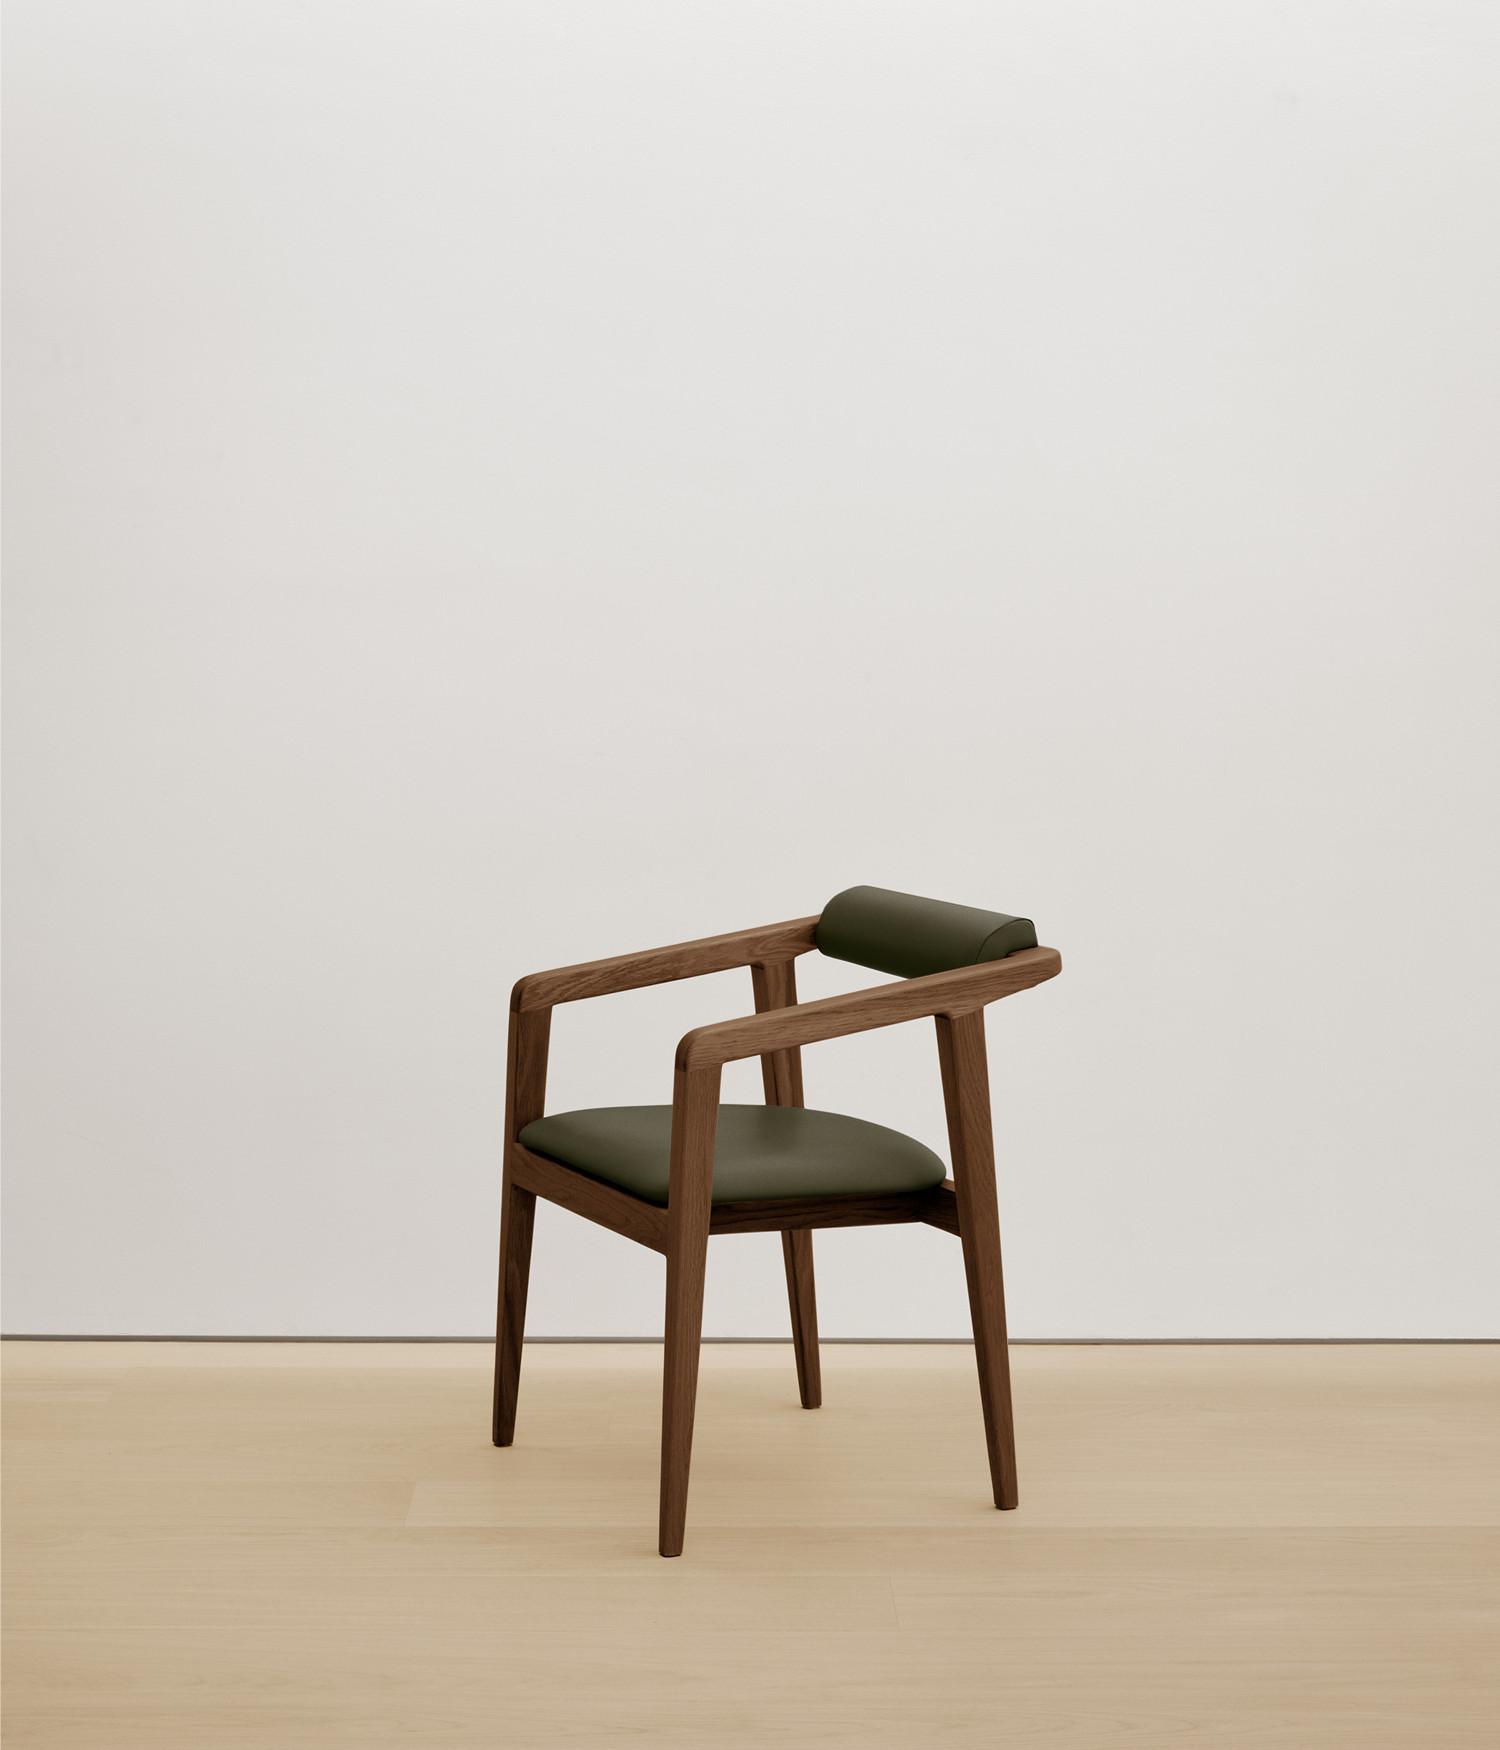  walnut chair with forest color upholstered seat